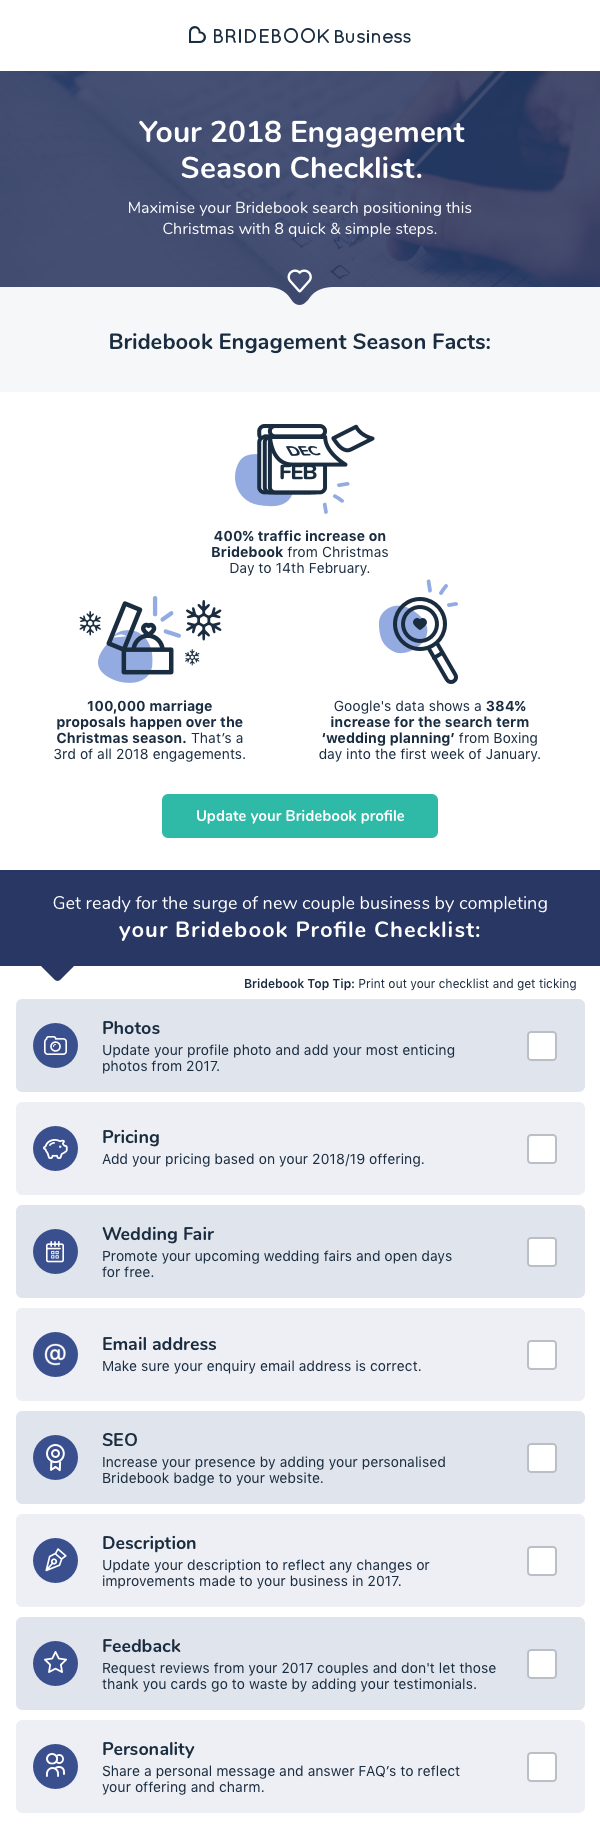 Get ready for the surge of new couple business by completing your  Bridebook Profile Checklist.